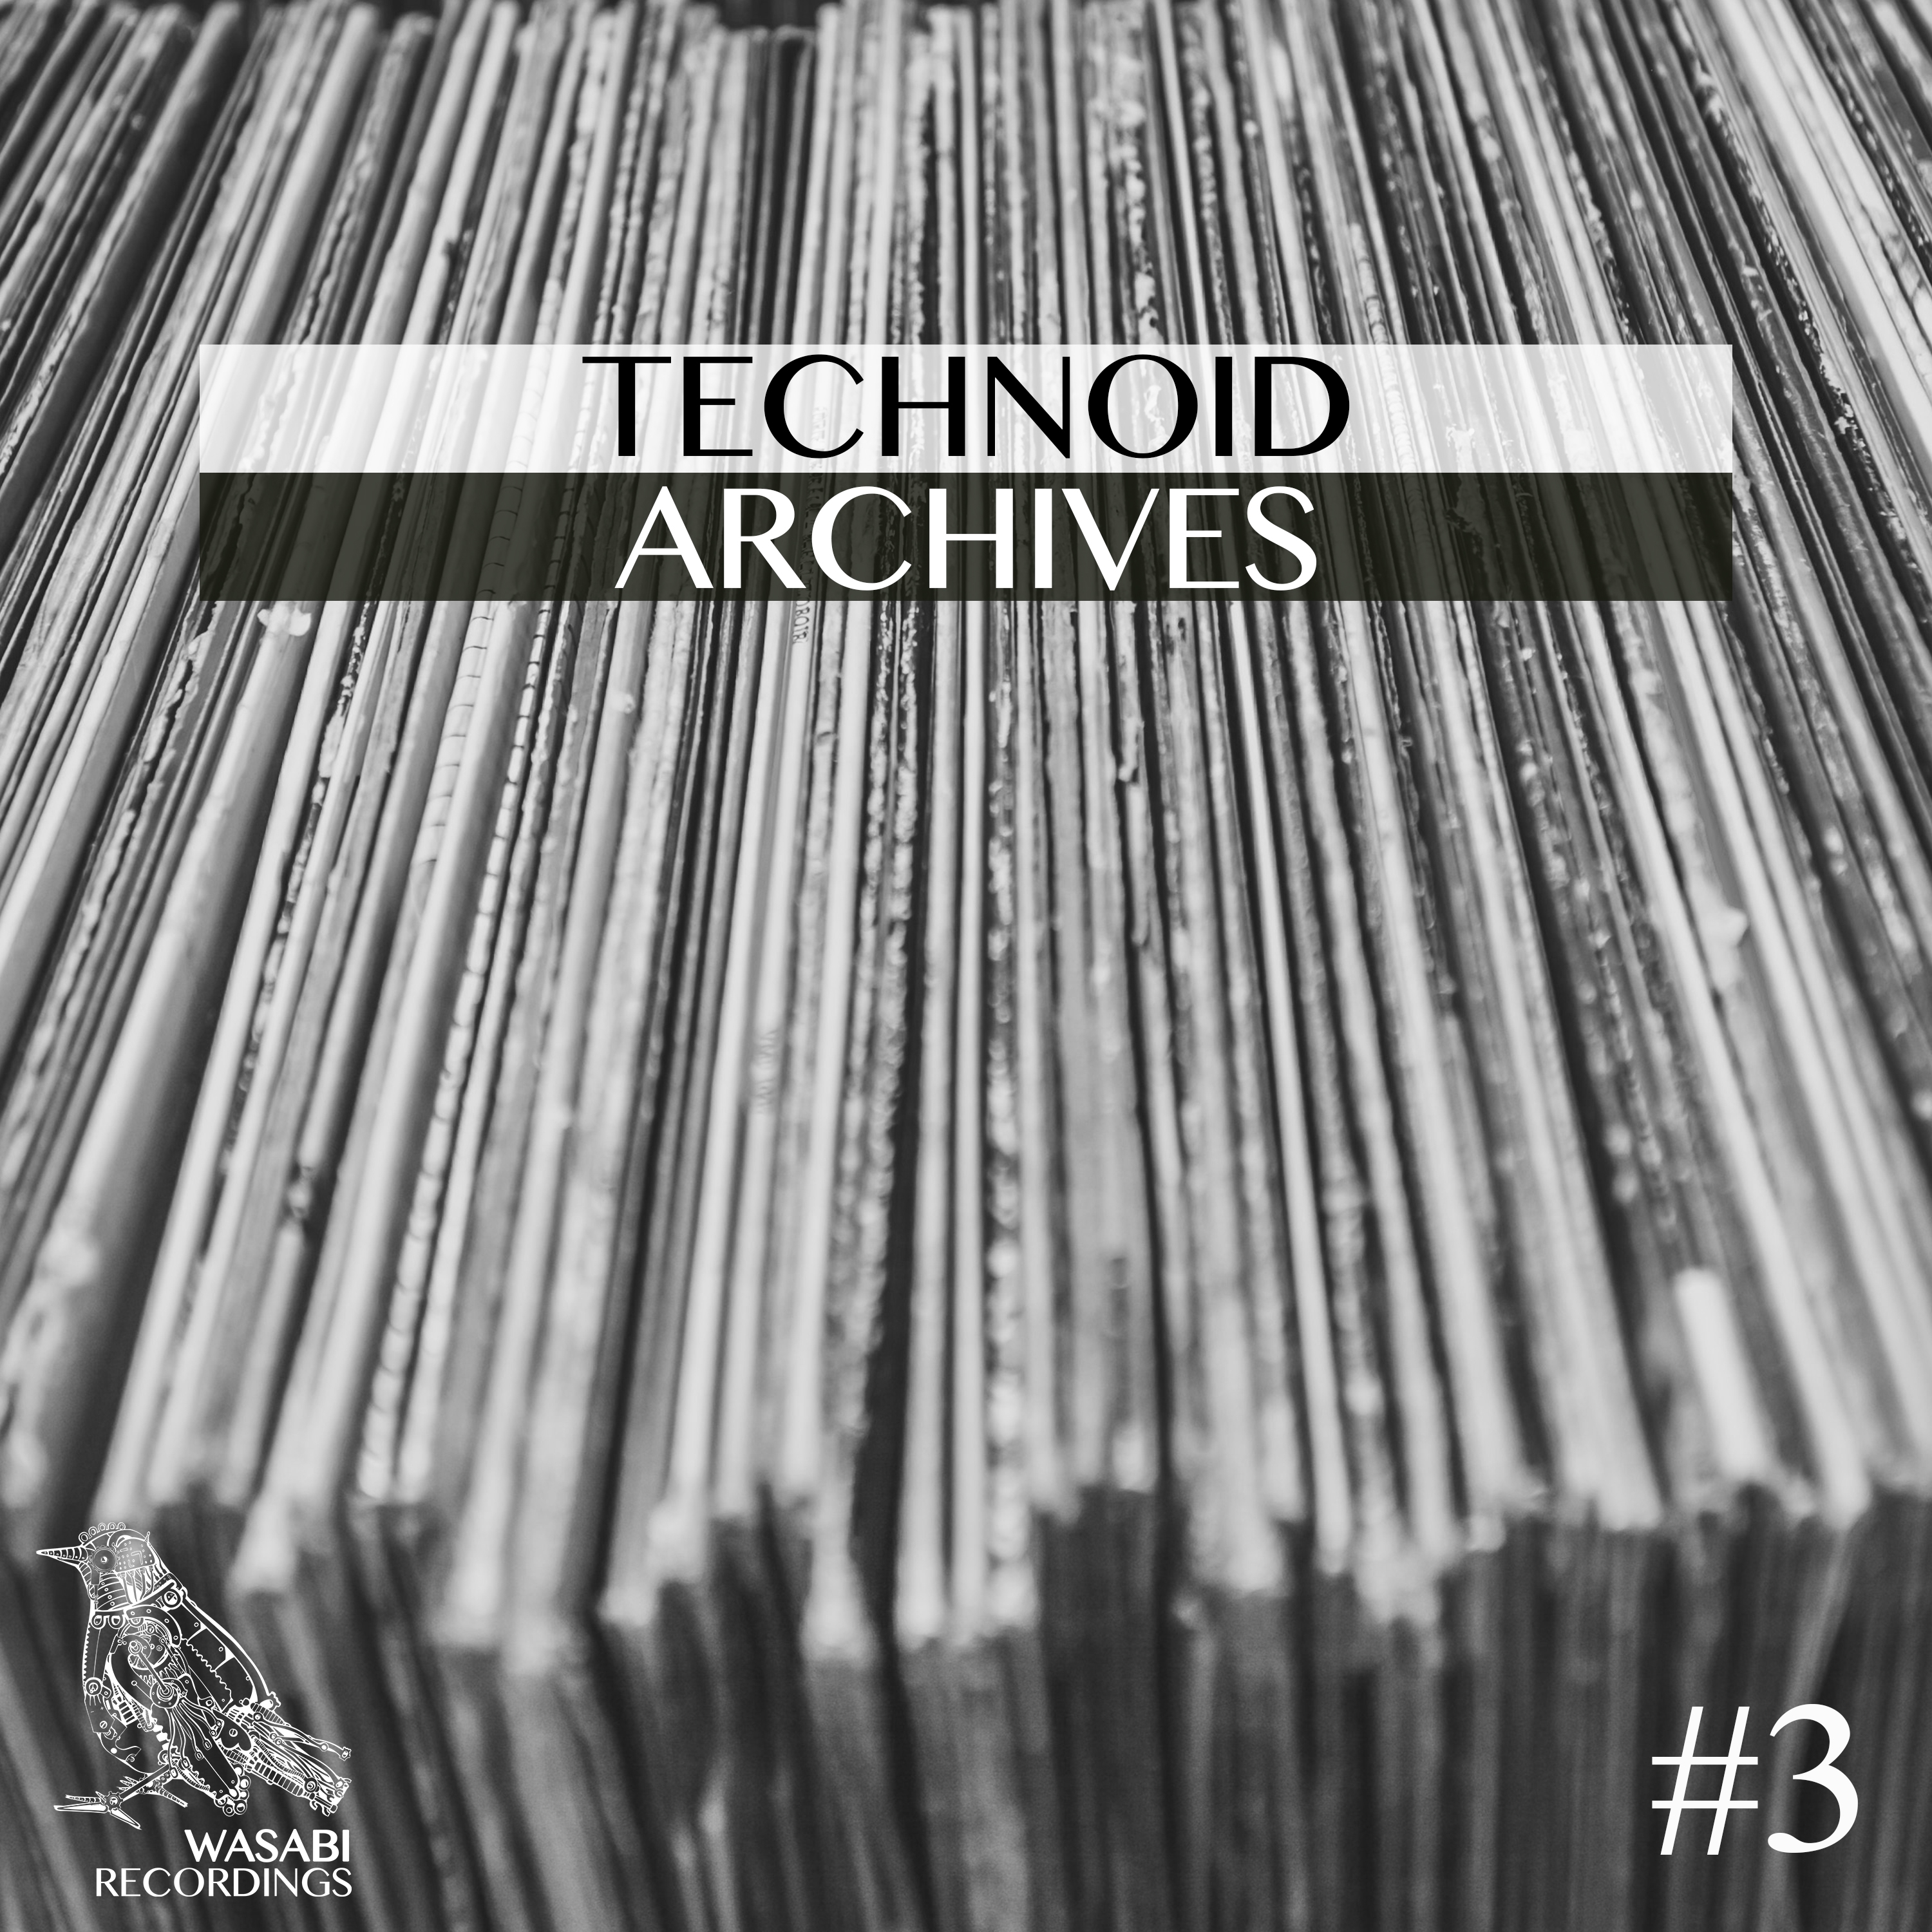 Technoid Archives #3